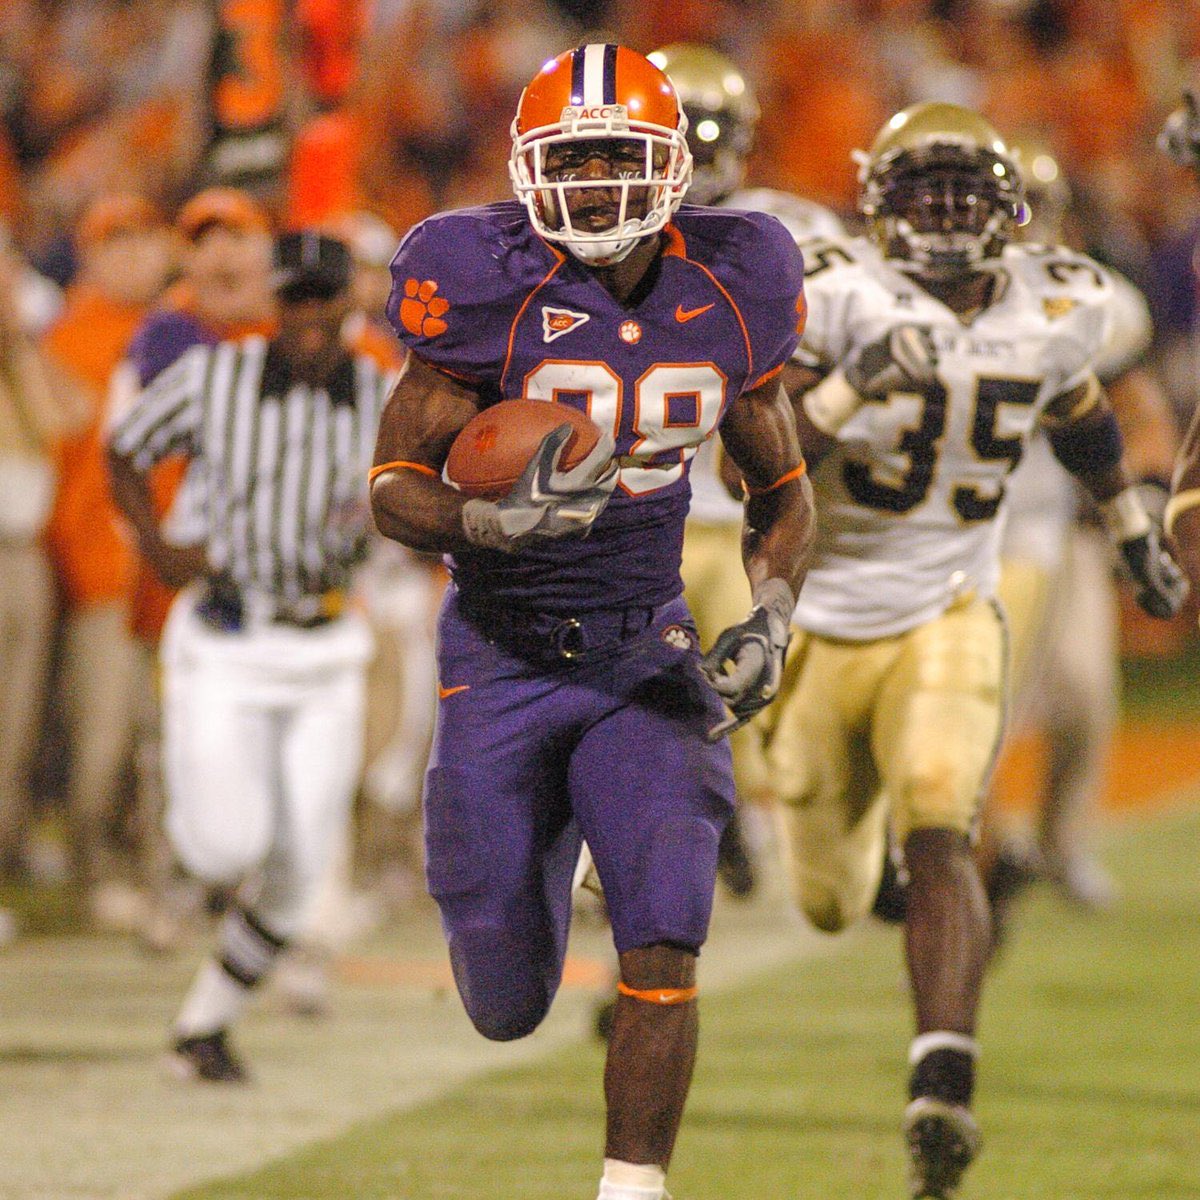 James “Thunder” Davis and CJ “Lightning” Spiller proceeded to run wild on the Jackets, accounting for 372 combined yards and leading the Tigers to a dominating 31-7 win that is still the golden moment for Clemson’s purple uniforms to this day.